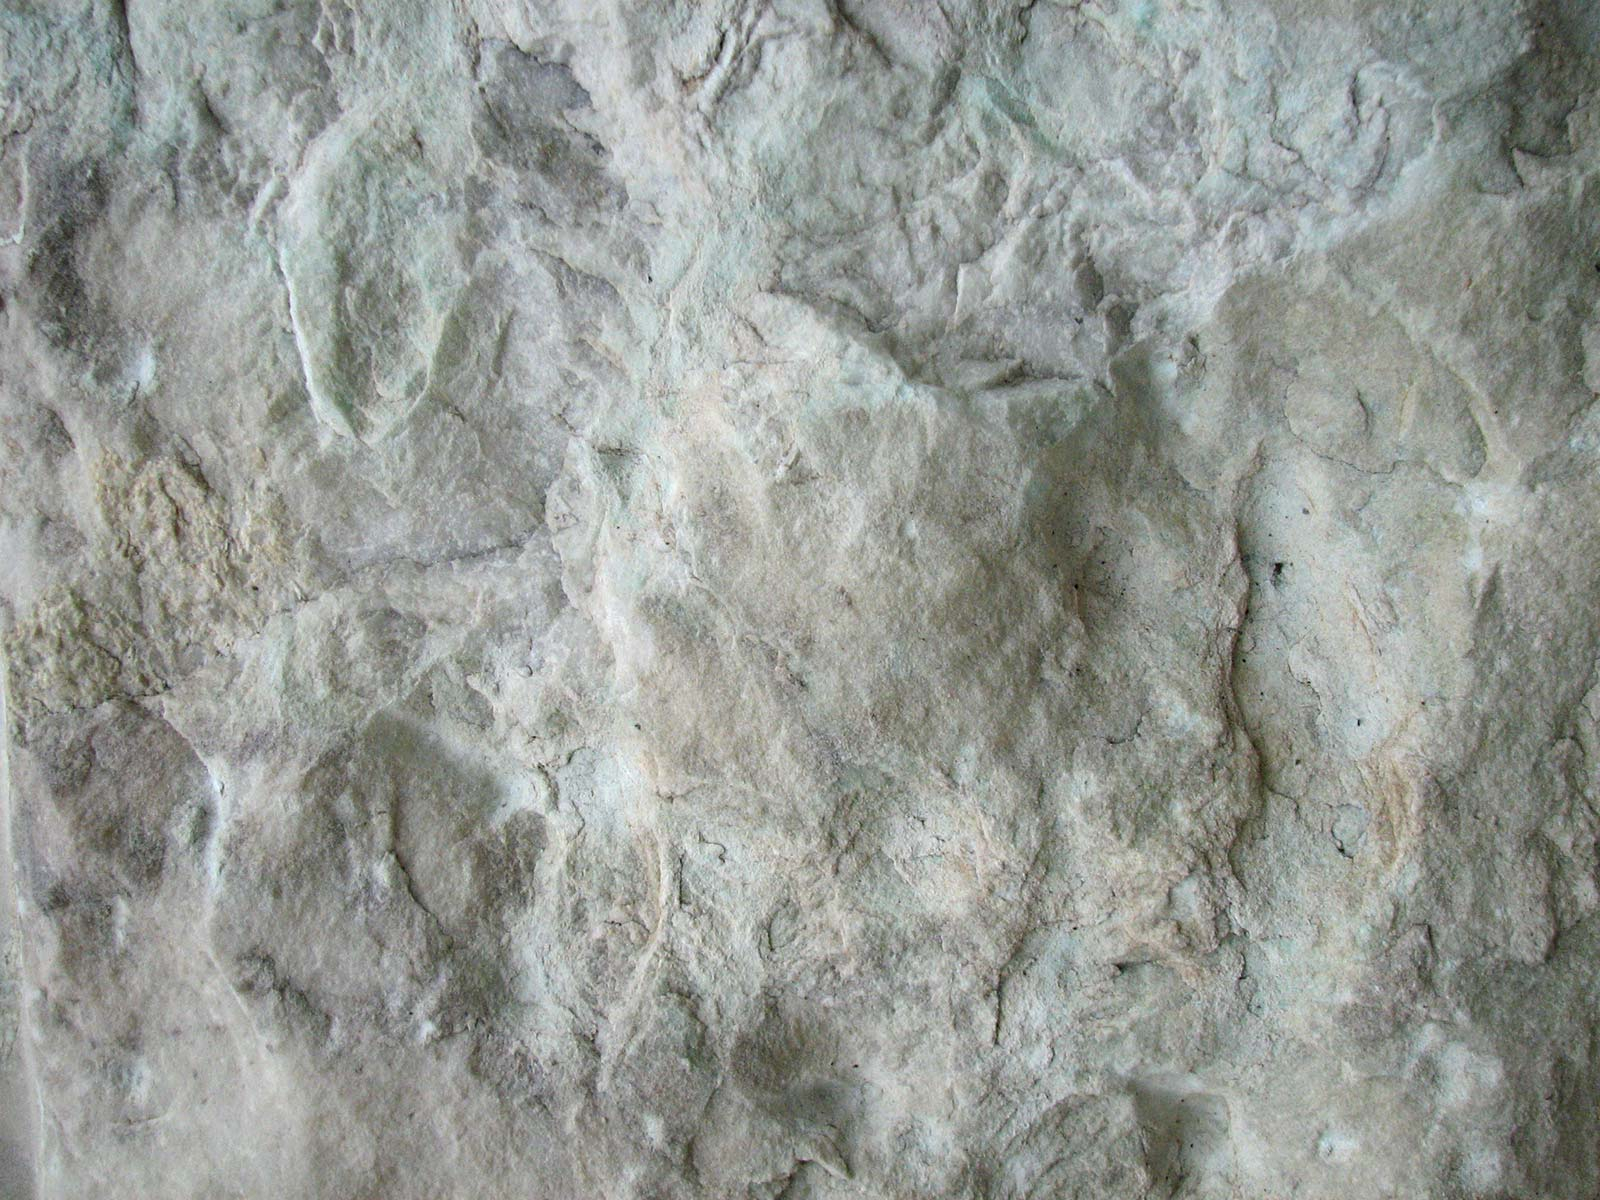 Stone-42 for 1600 x 1200 resolution